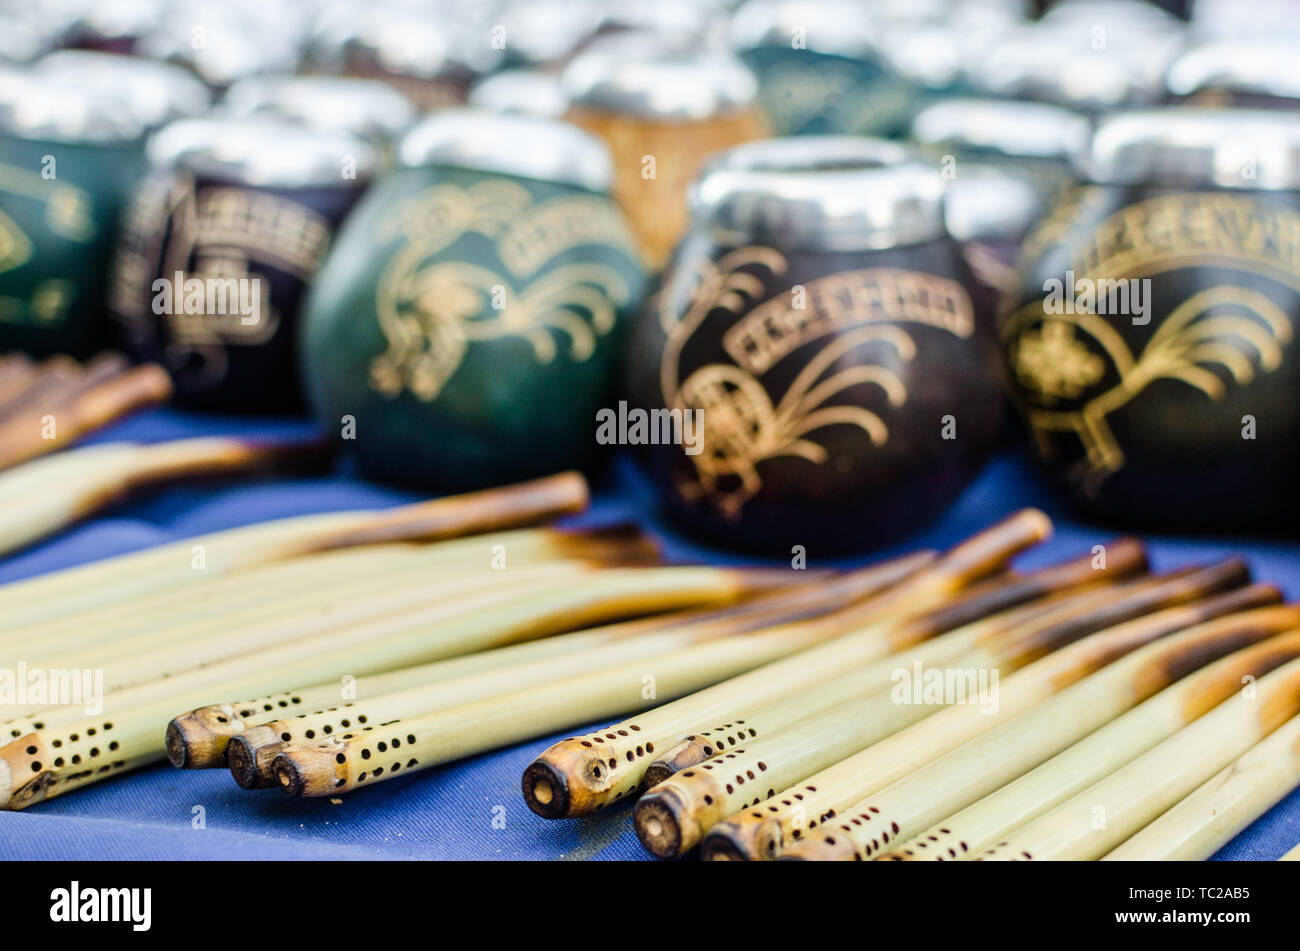 Calabash gourds for drinking Argentina yerba mate tea and bombilla straws Stock Photo